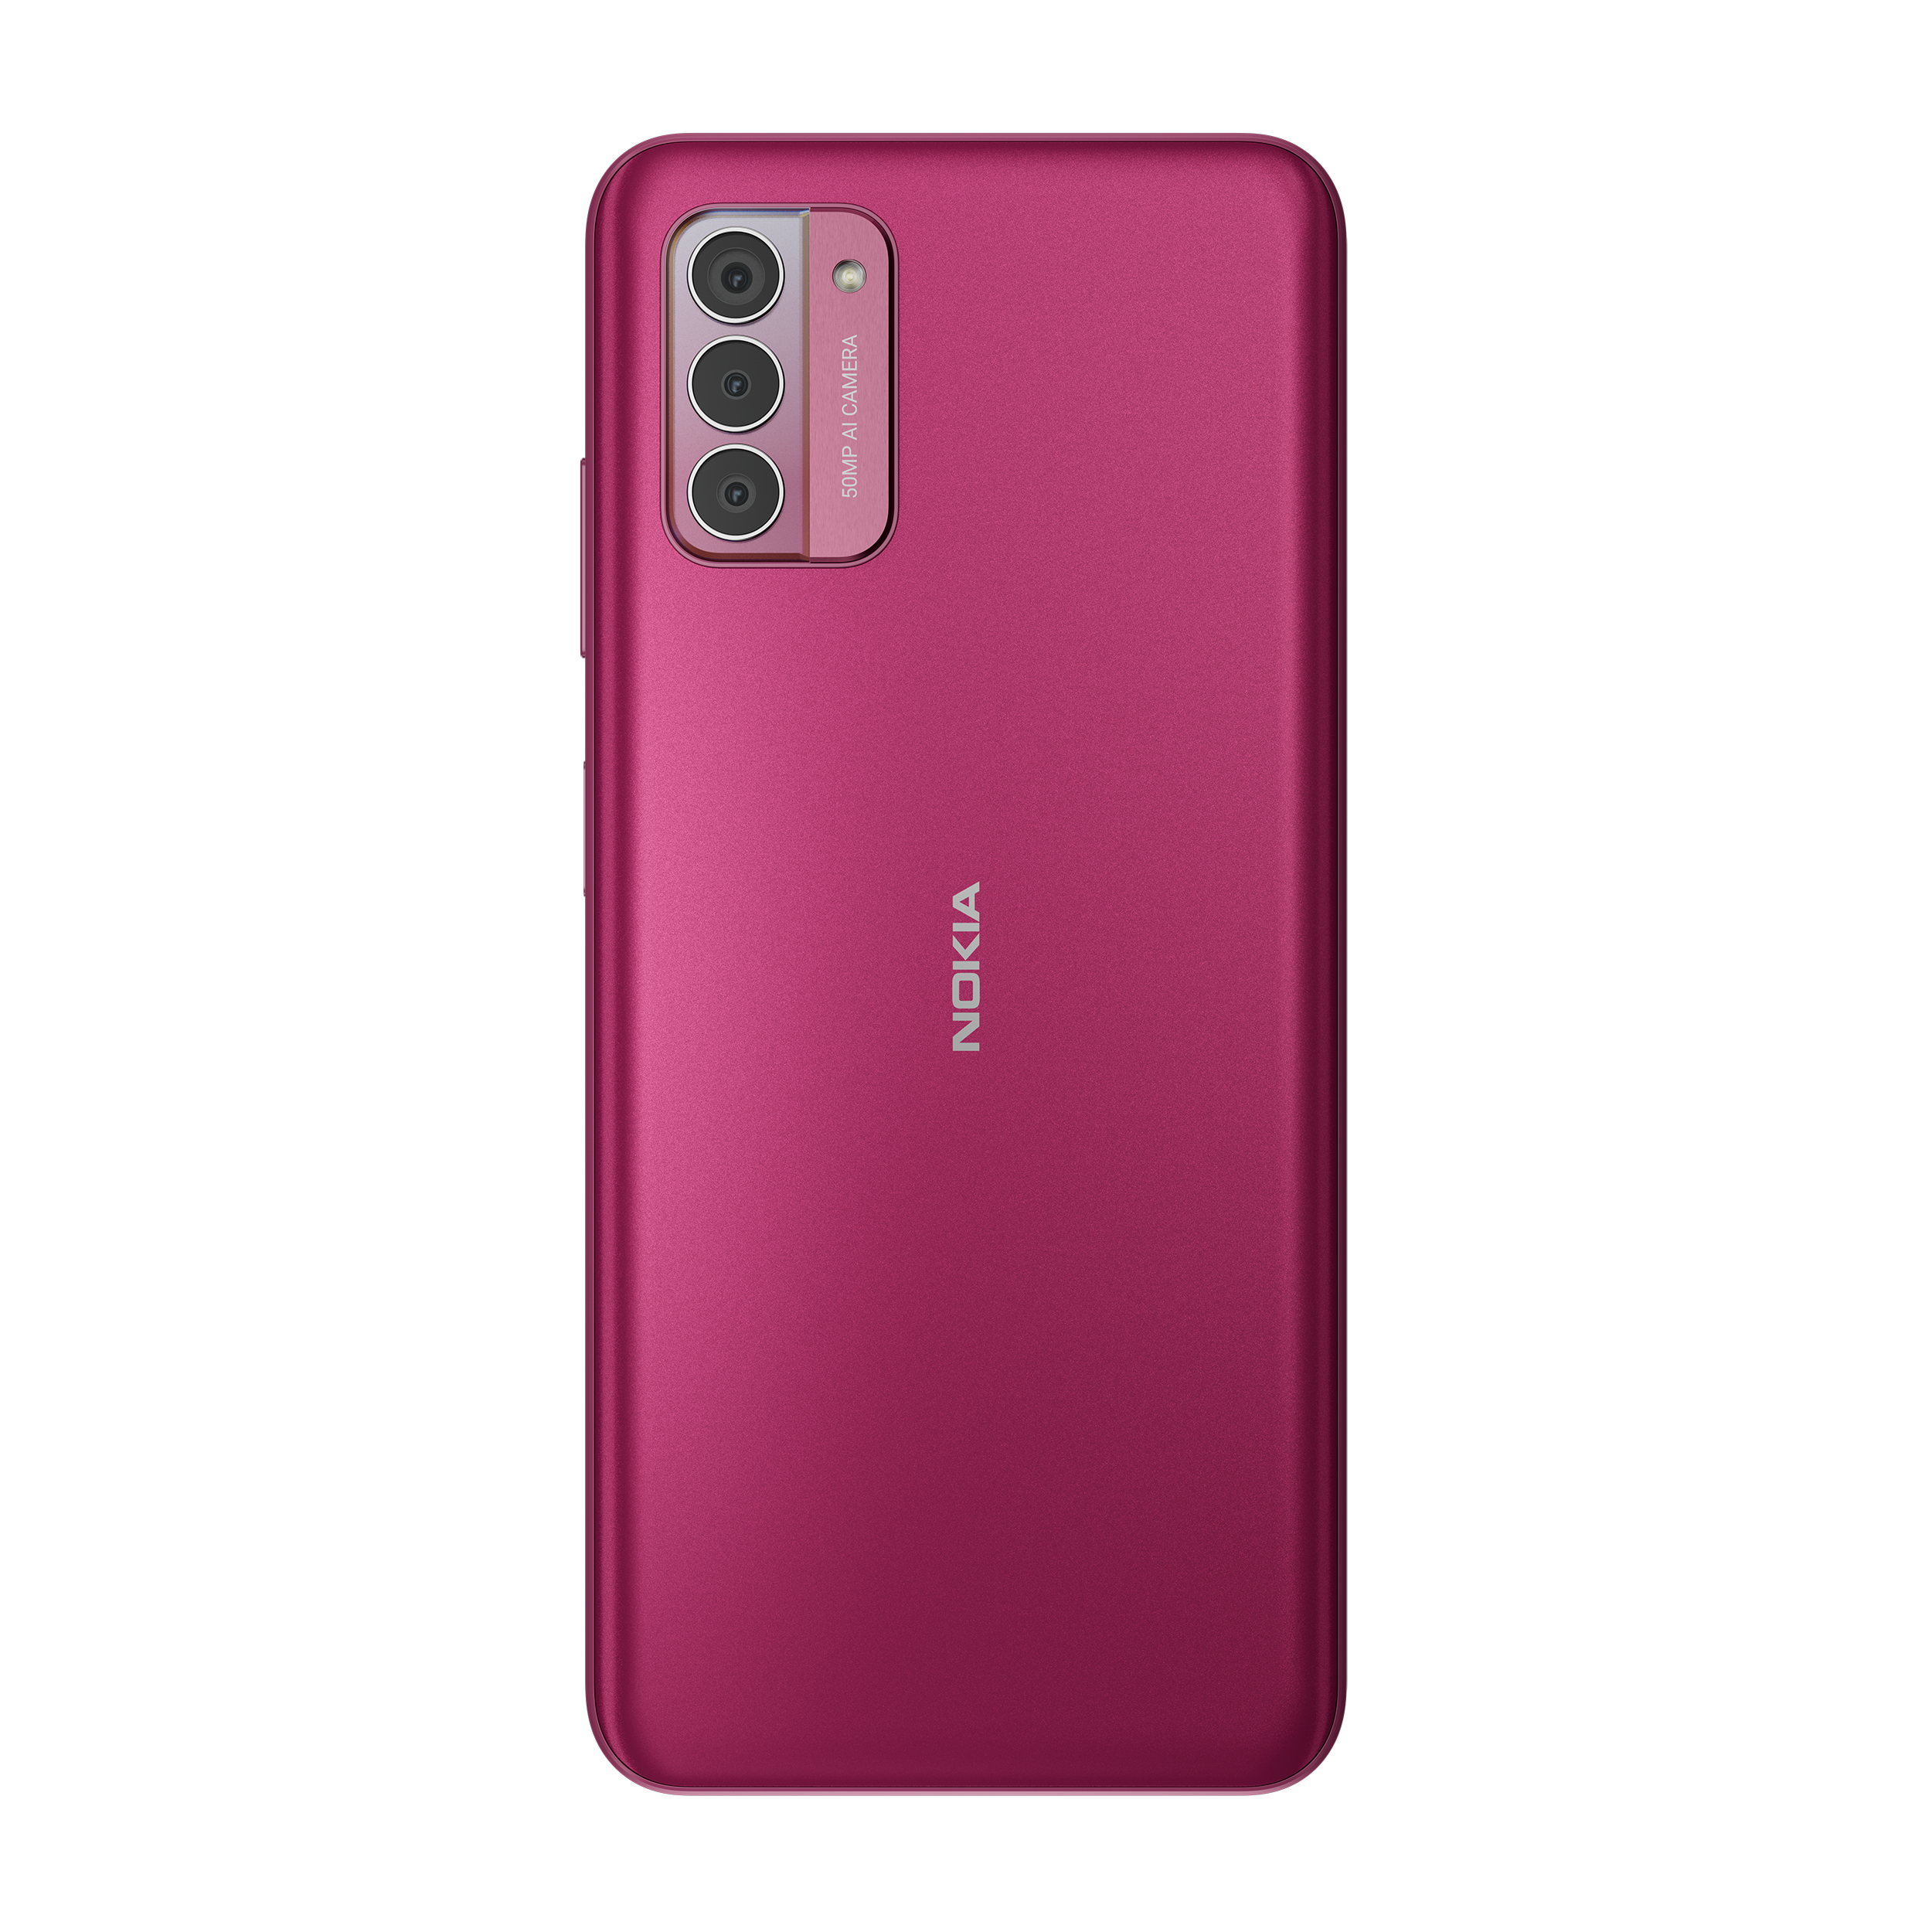 G42 5G Smartphone Nokia ++ so Cyberport 13.0 Dual-Sim Android pink 6/128 GB